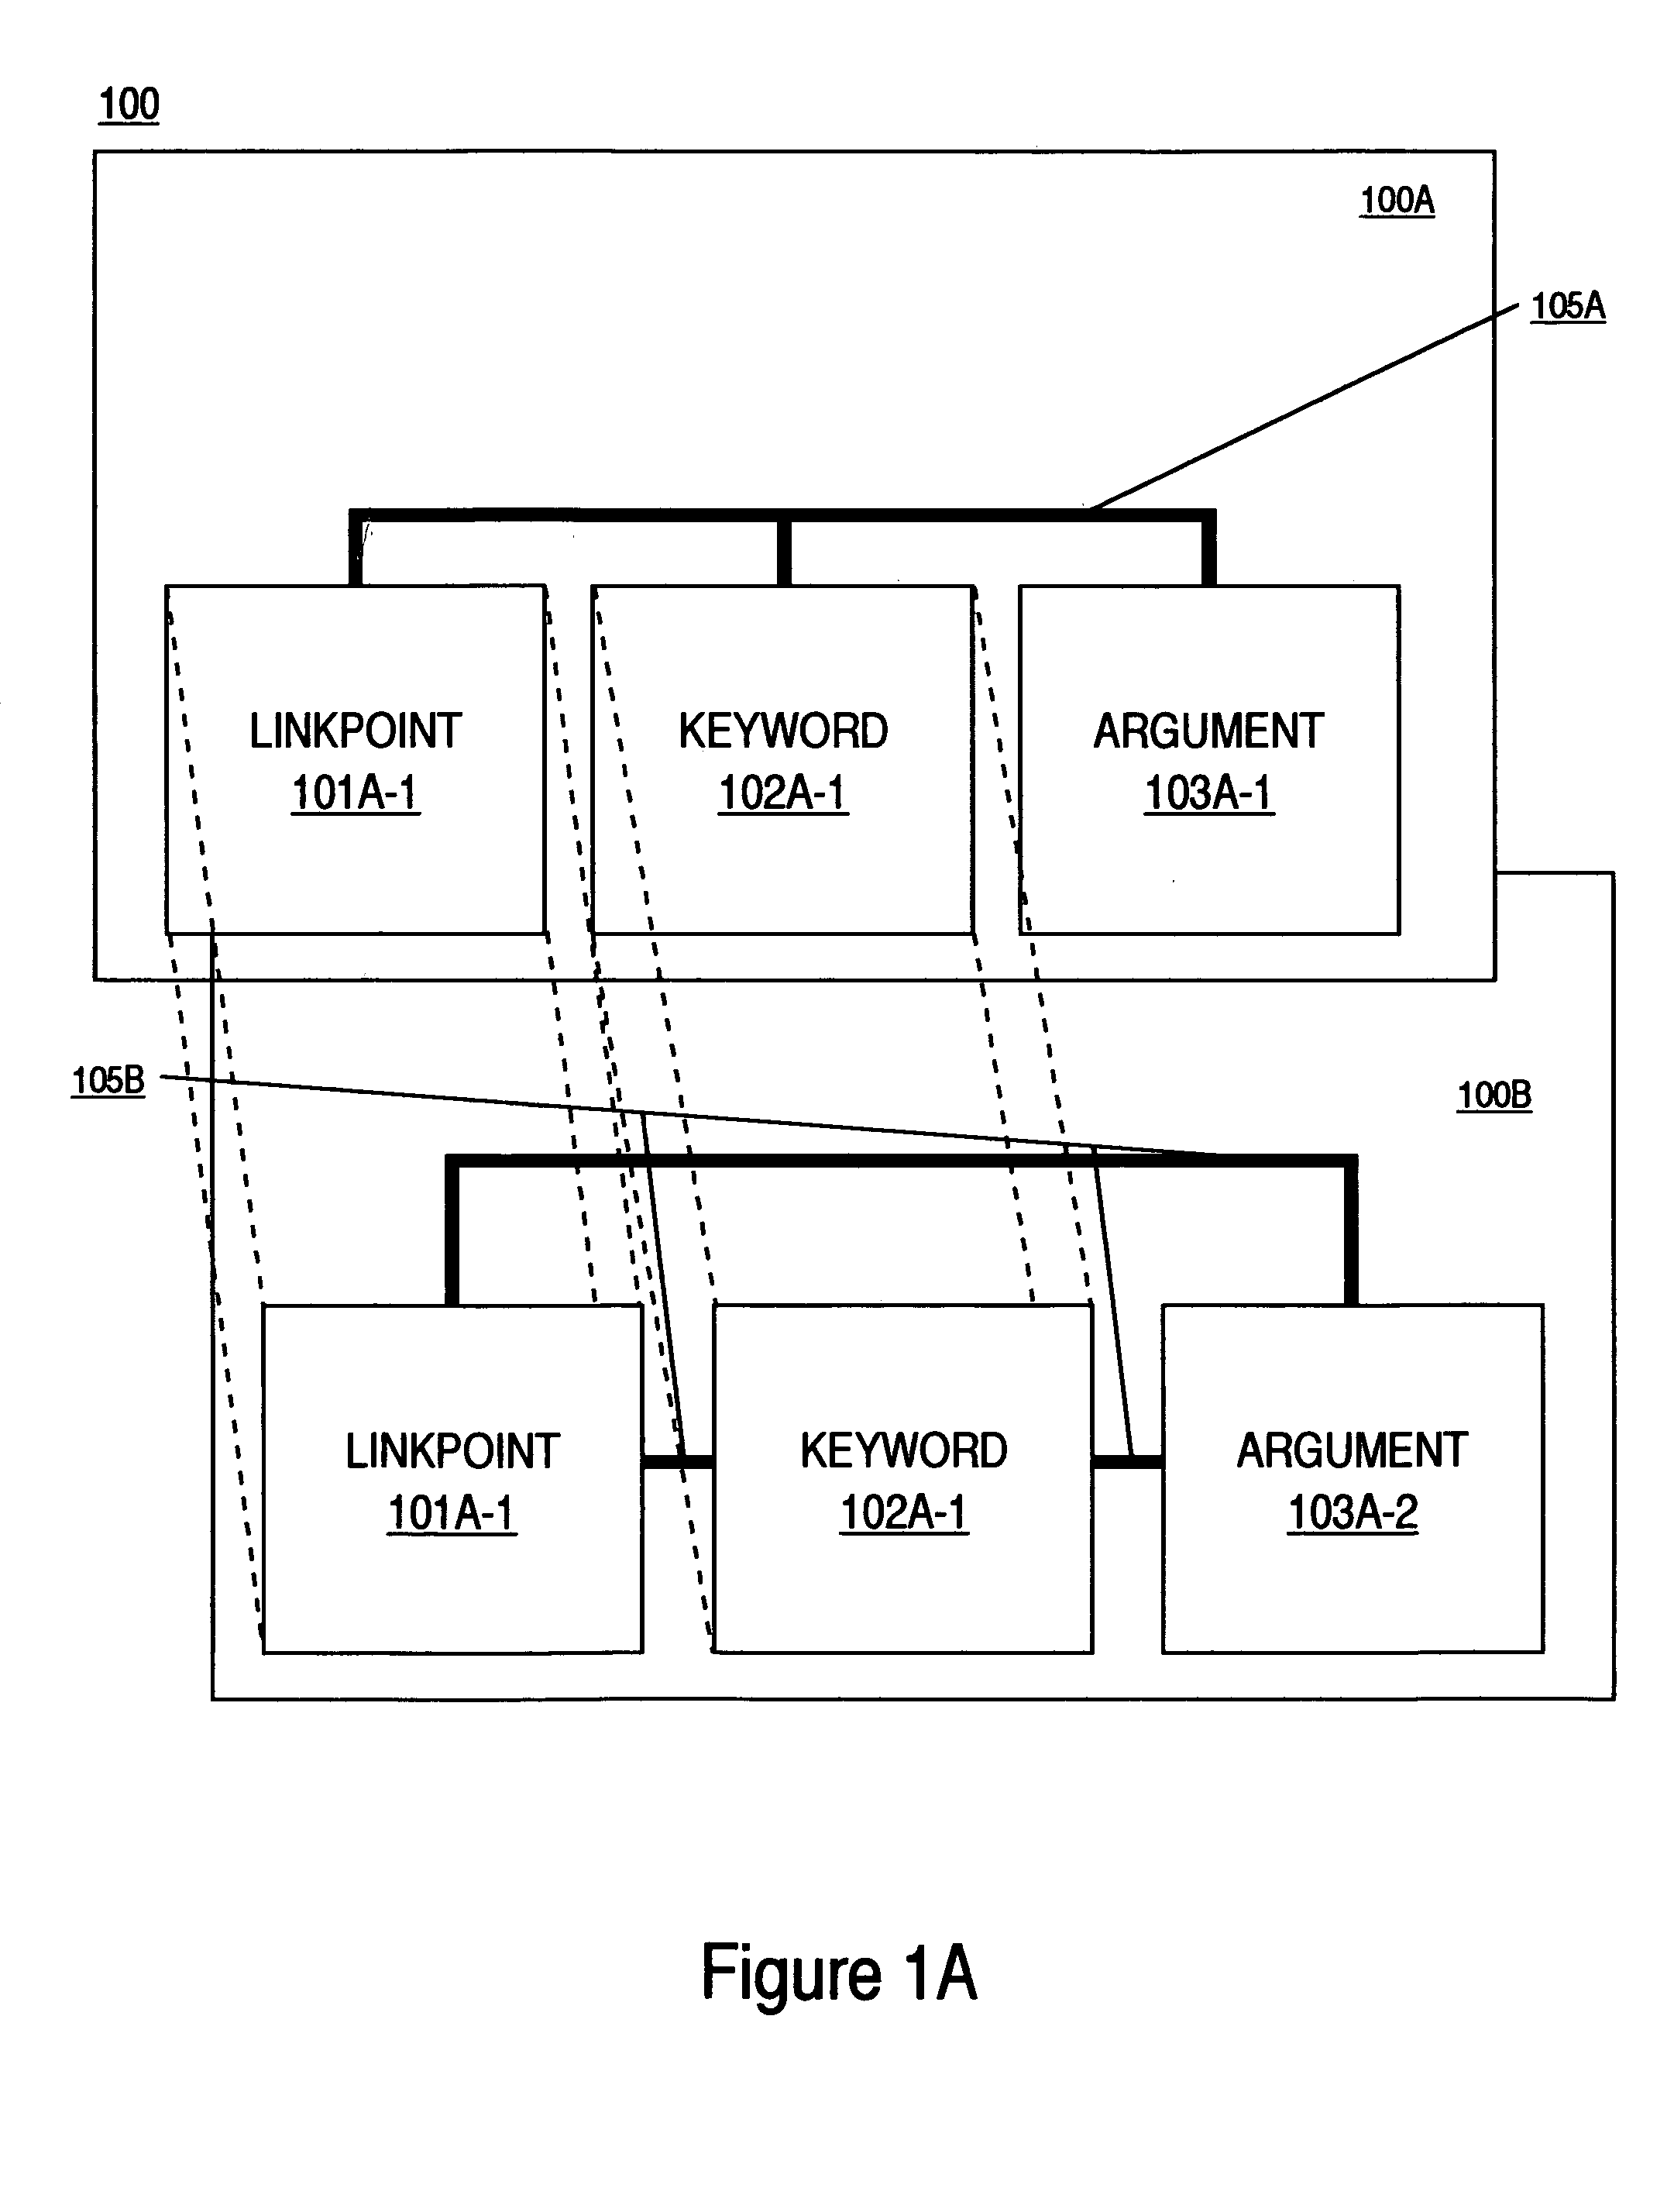 Method and system for generating documentation from operating system command syntax